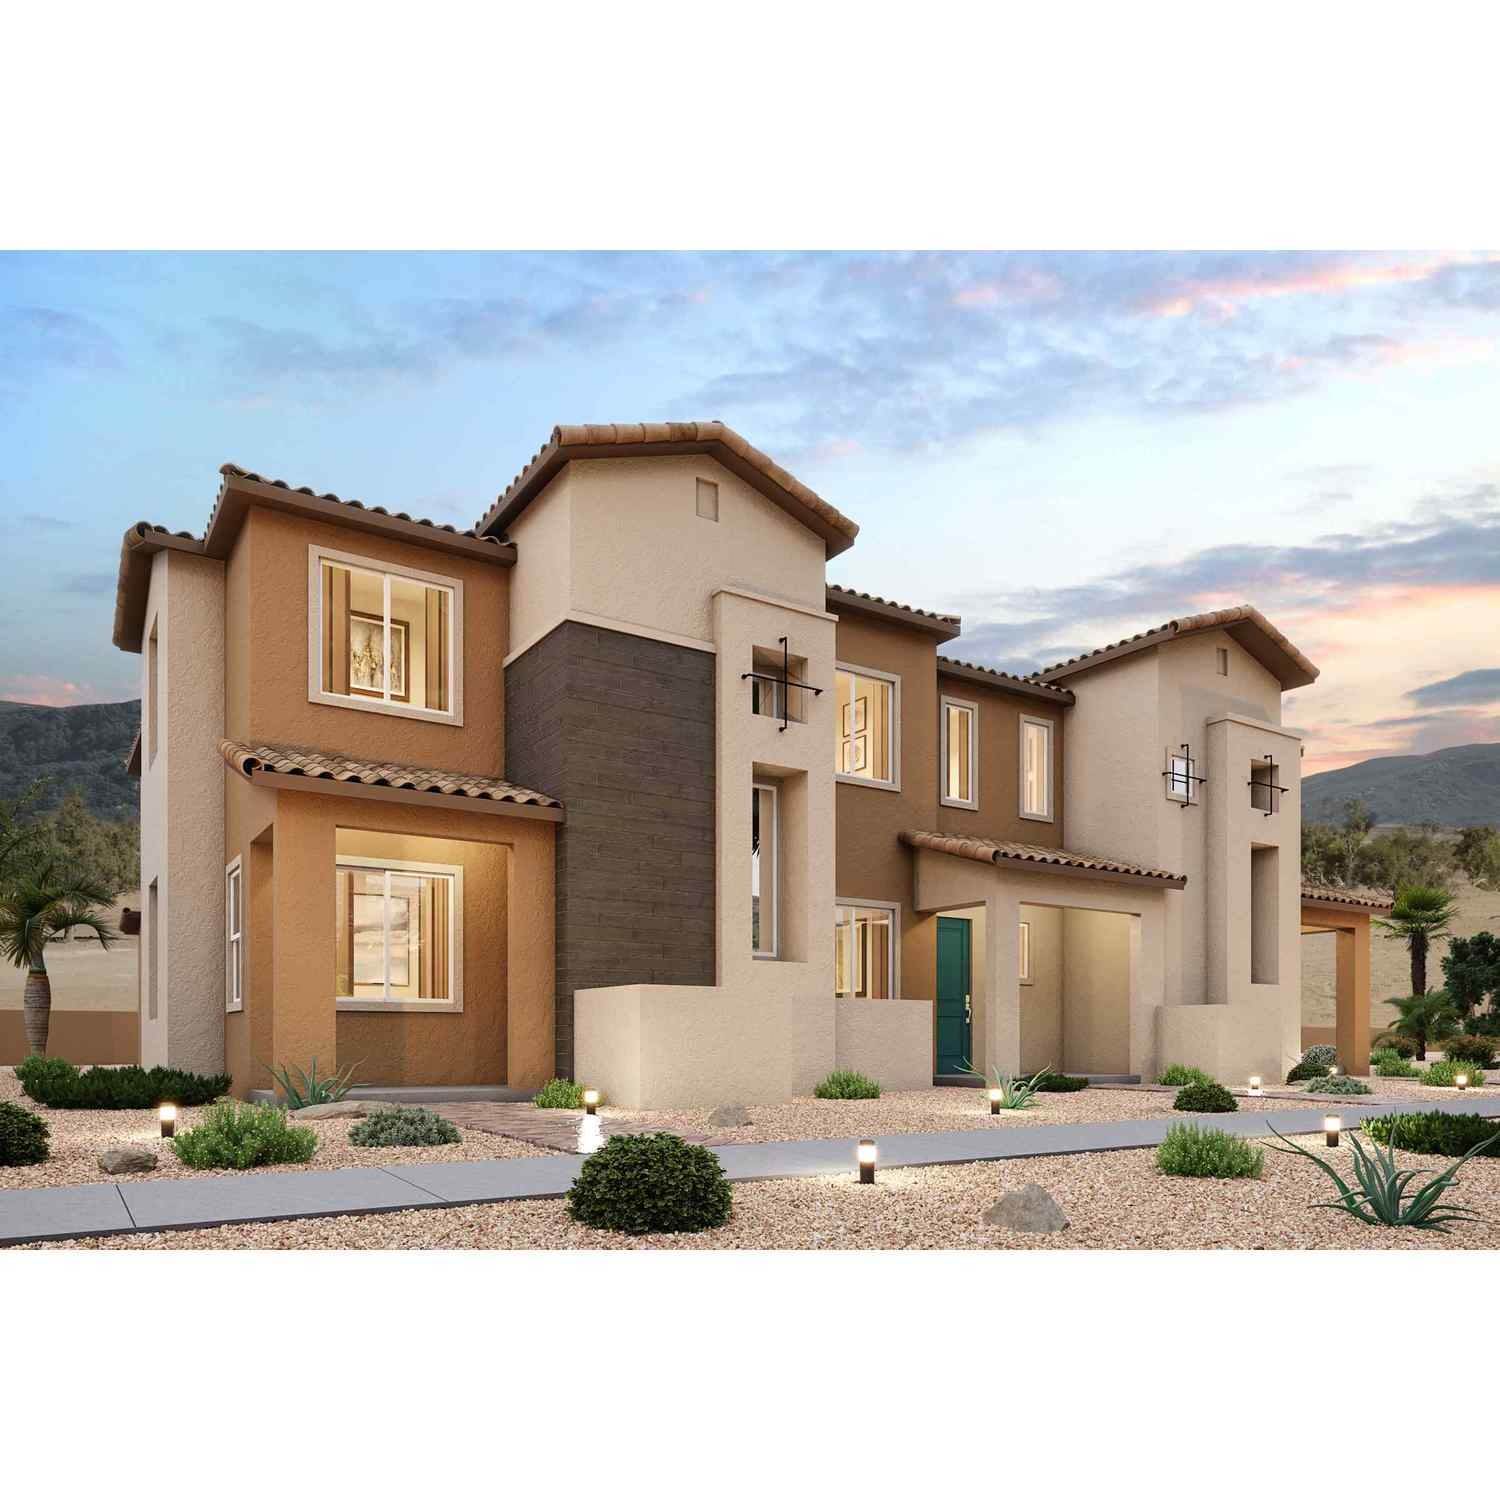 Alderidge Townhomes building at 248 Freeport View Place, Henderson, NV 89011